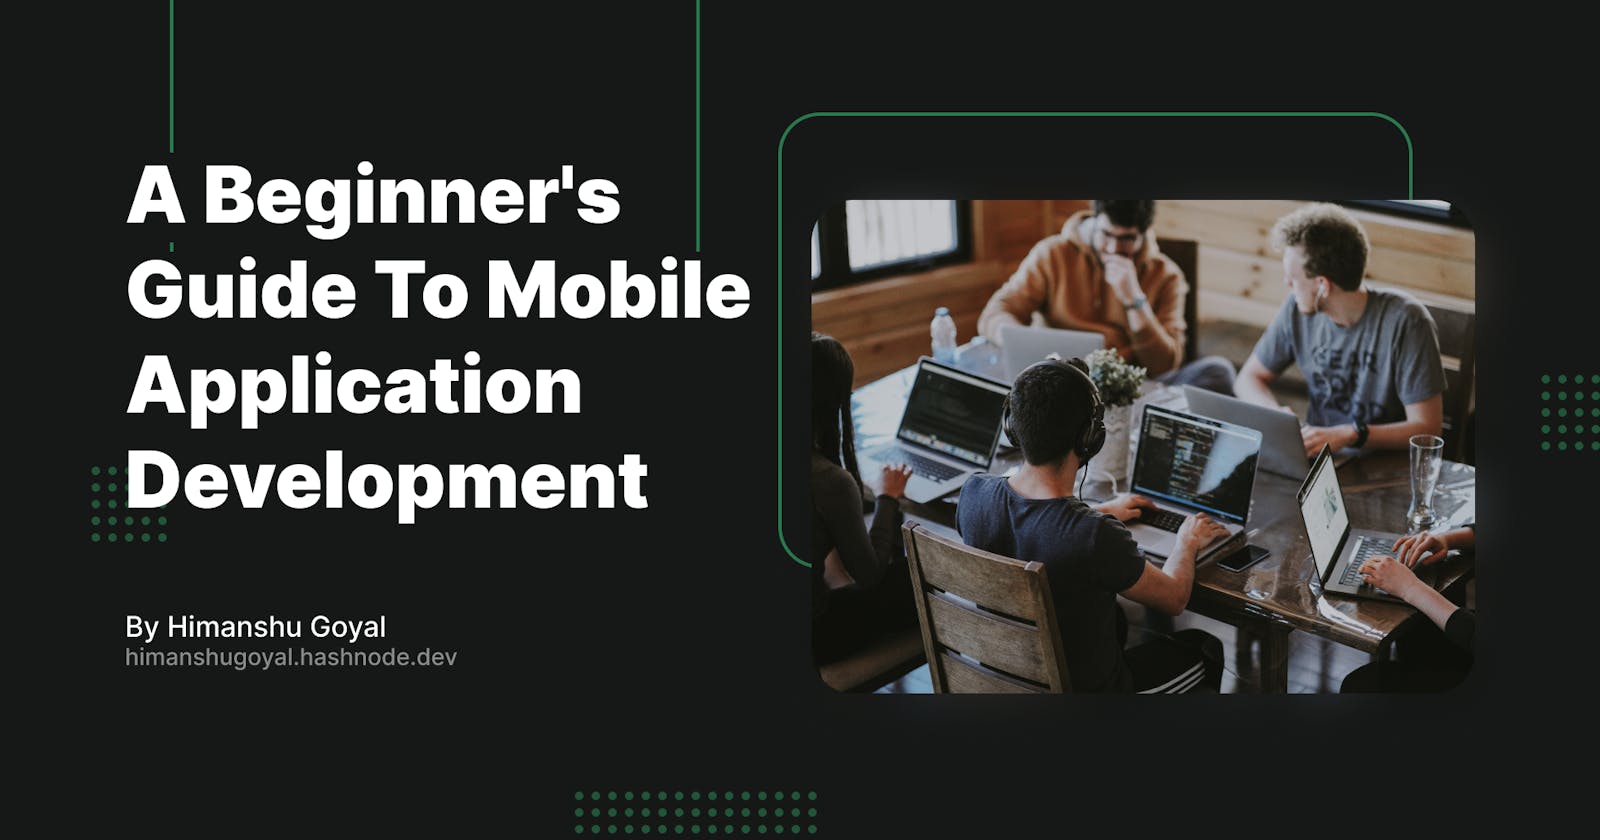 A Beginner's Guide To Mobile Application Development